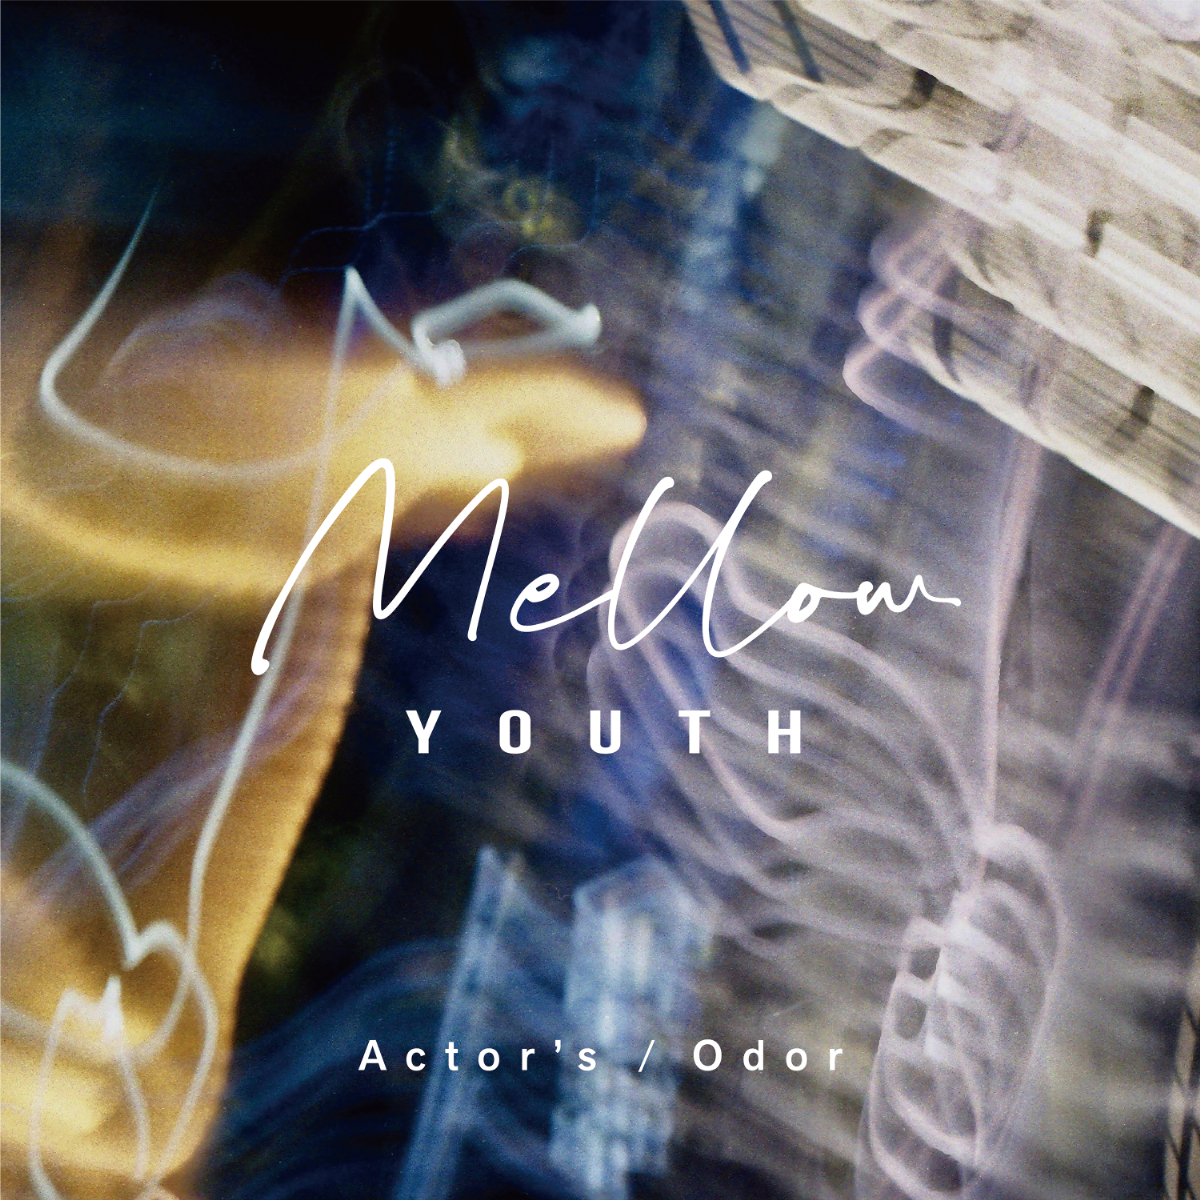 Mellow Youth「Actor’s / Odor」ジャケット